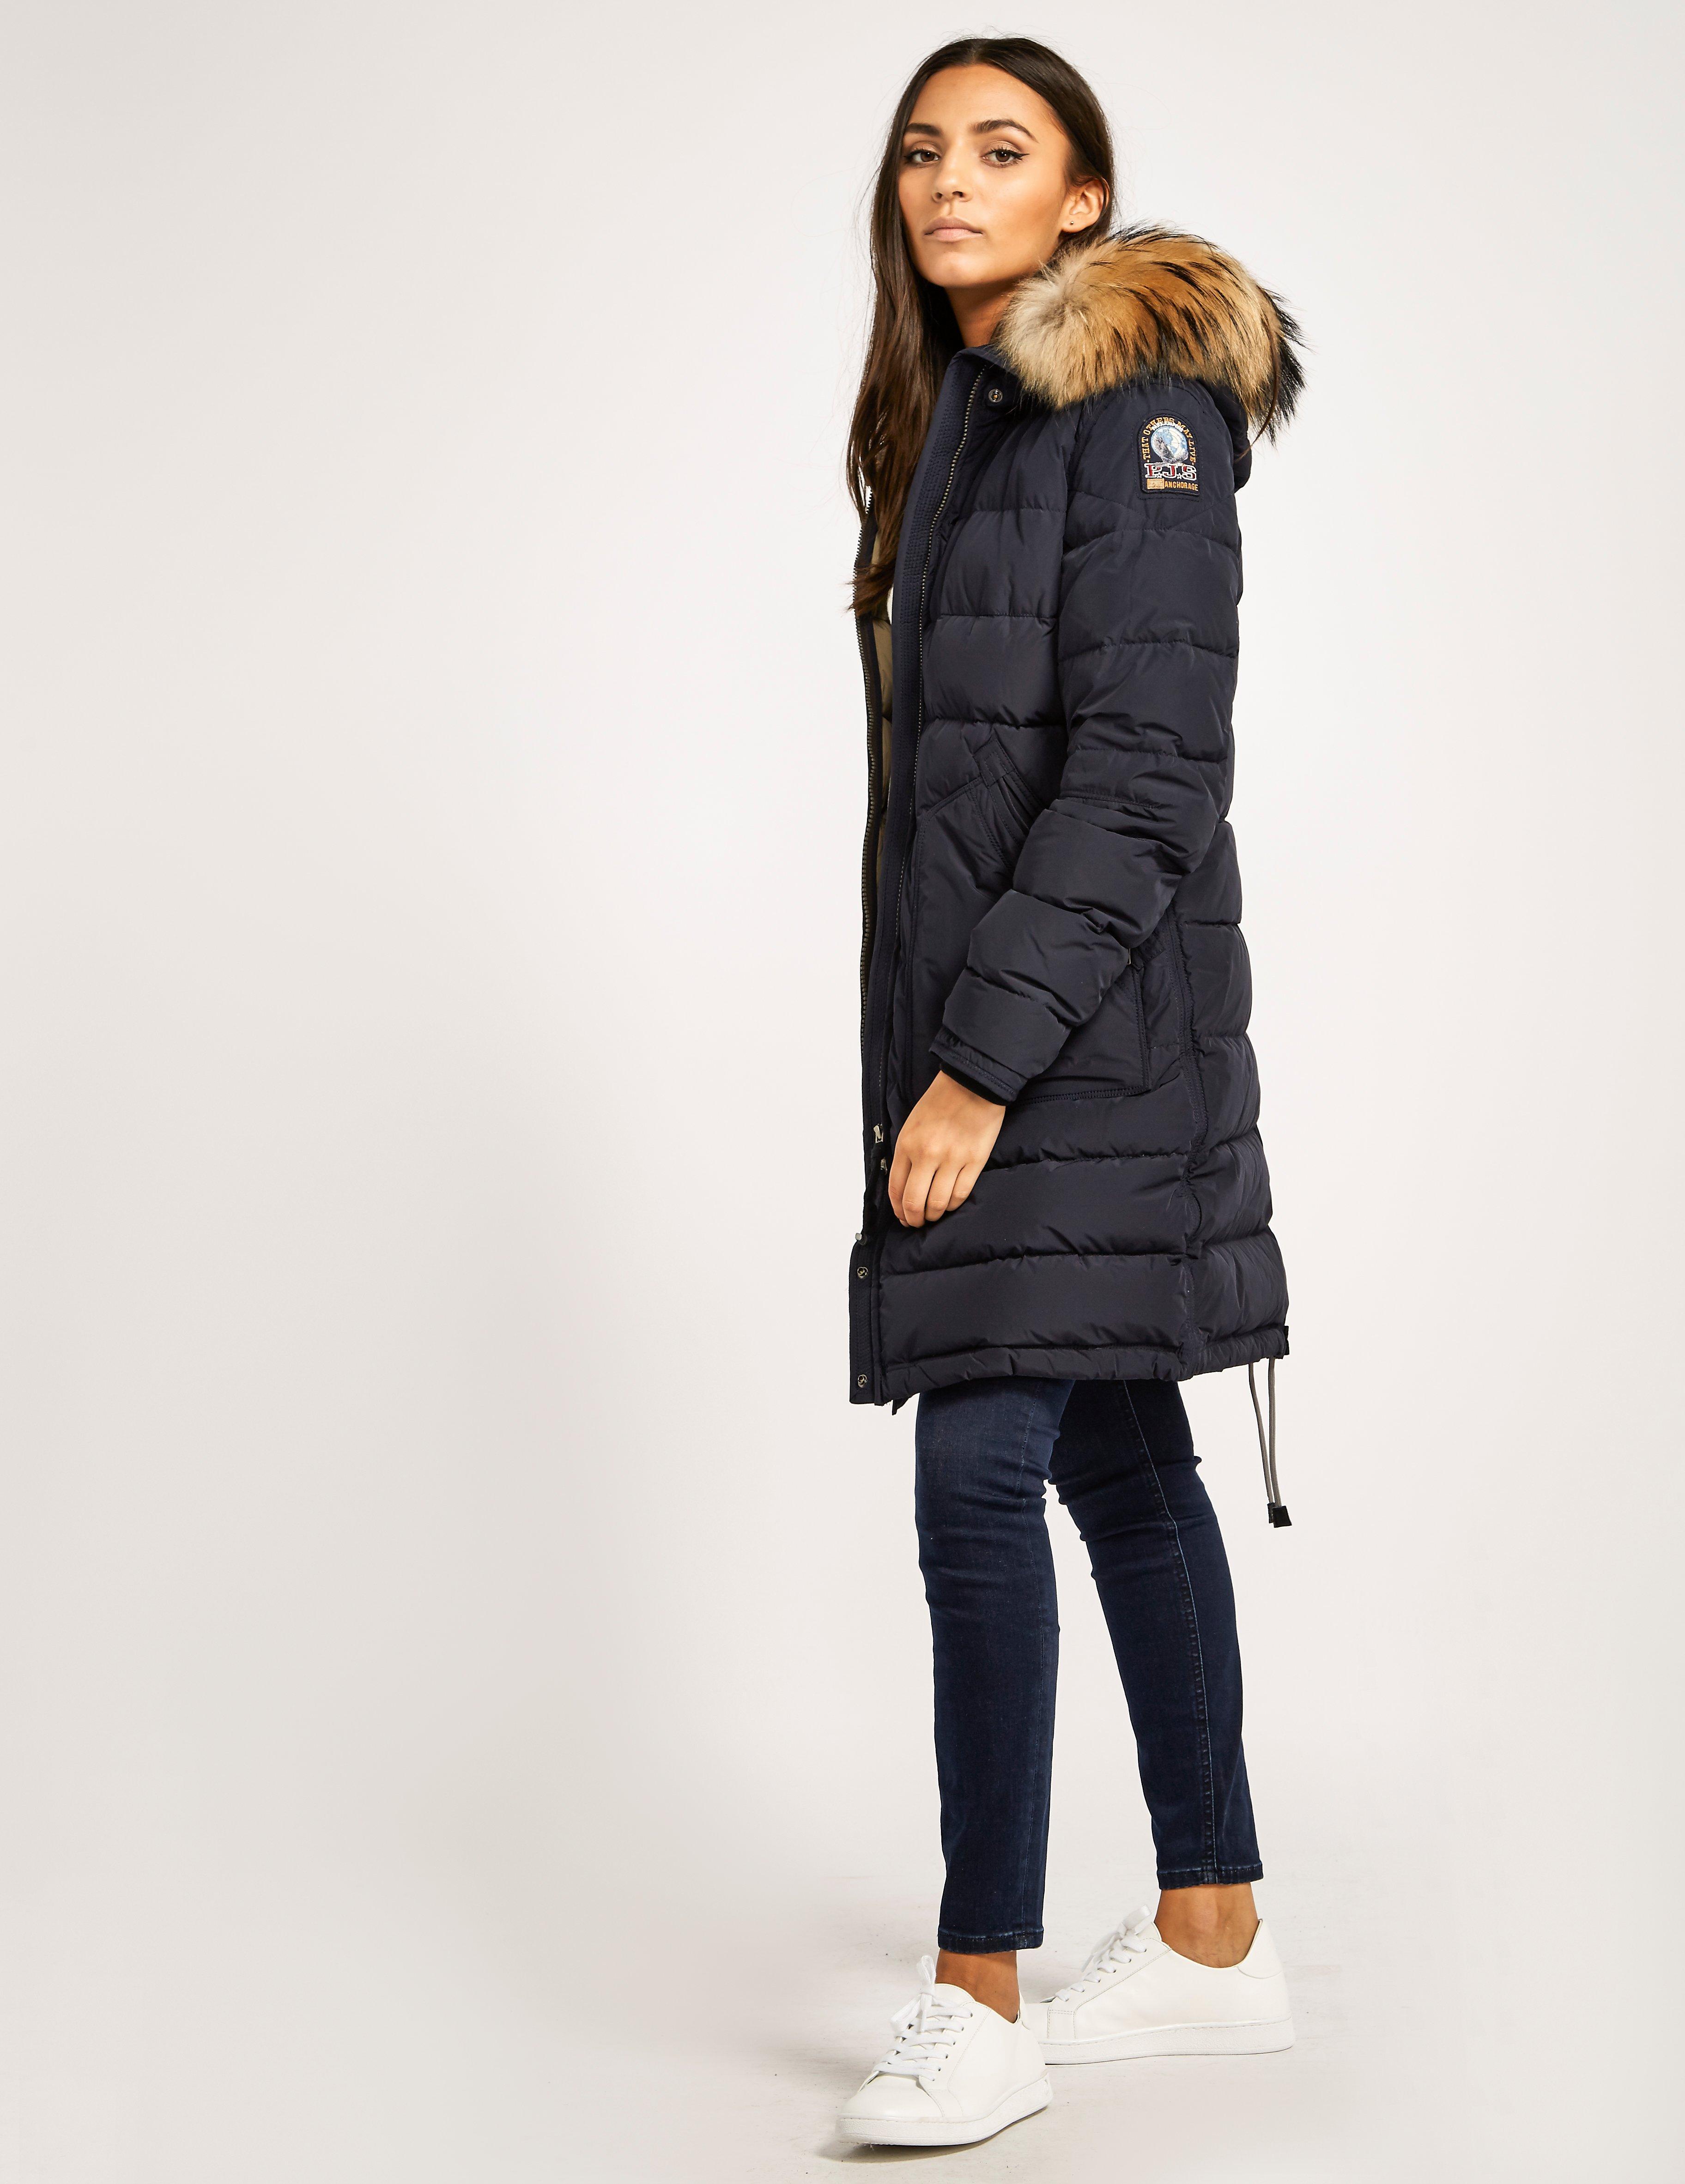 Parajumpers Light Long Bear Jacket in Navy Blue (Blue) - Lyst